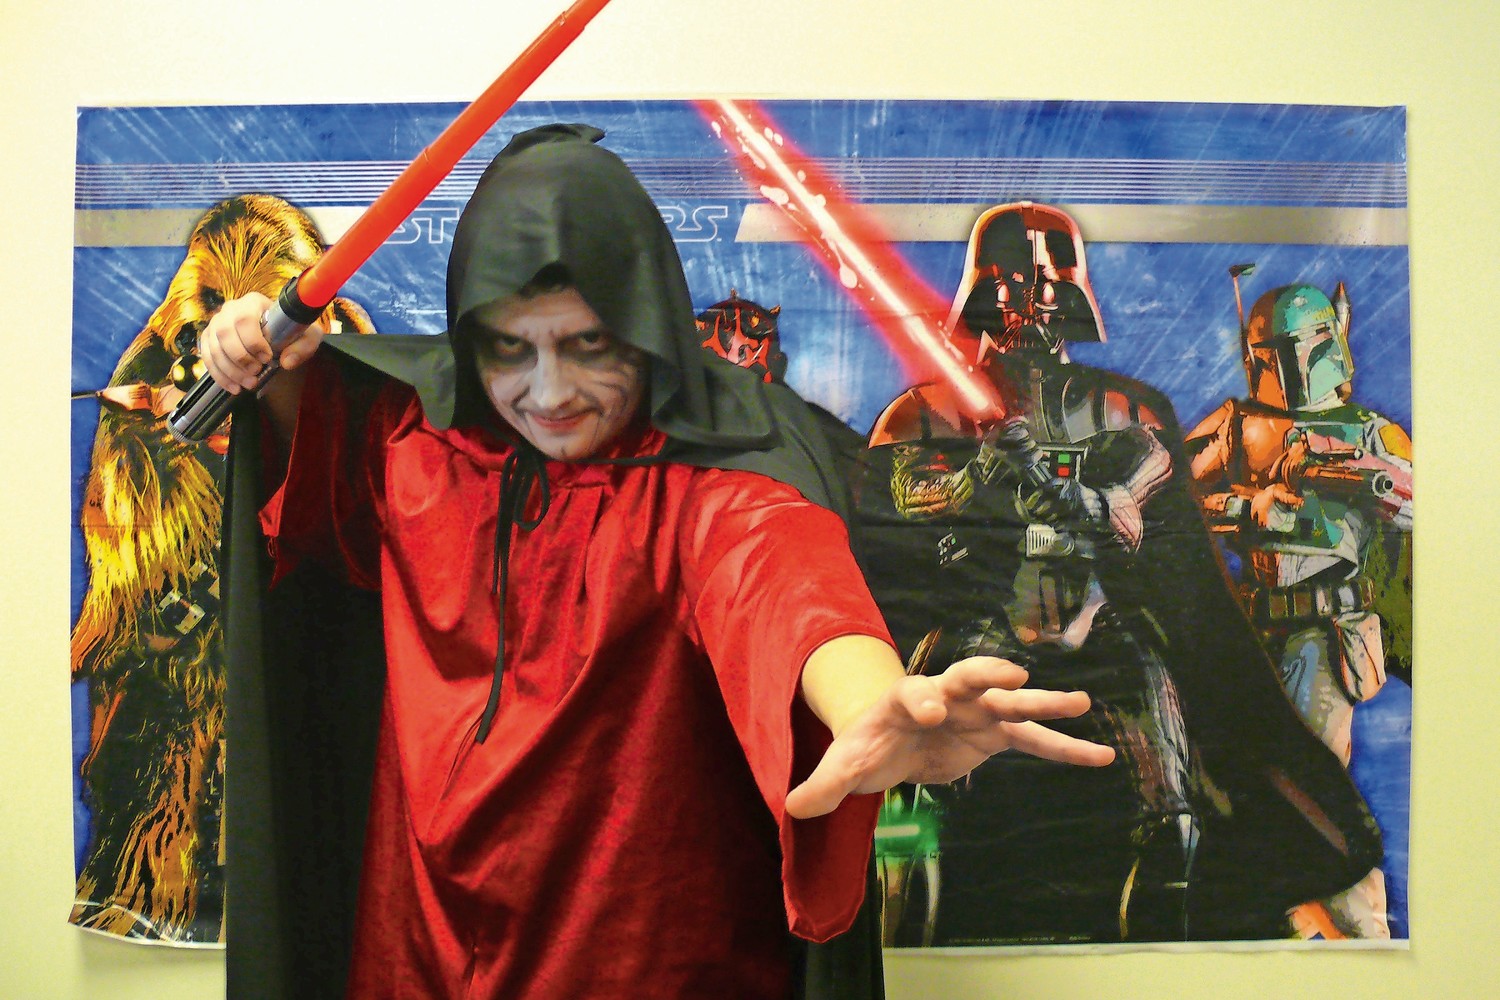 Fourteen-year-old James Licht, of East Meadow, dressed as the Emperior Palpatine.